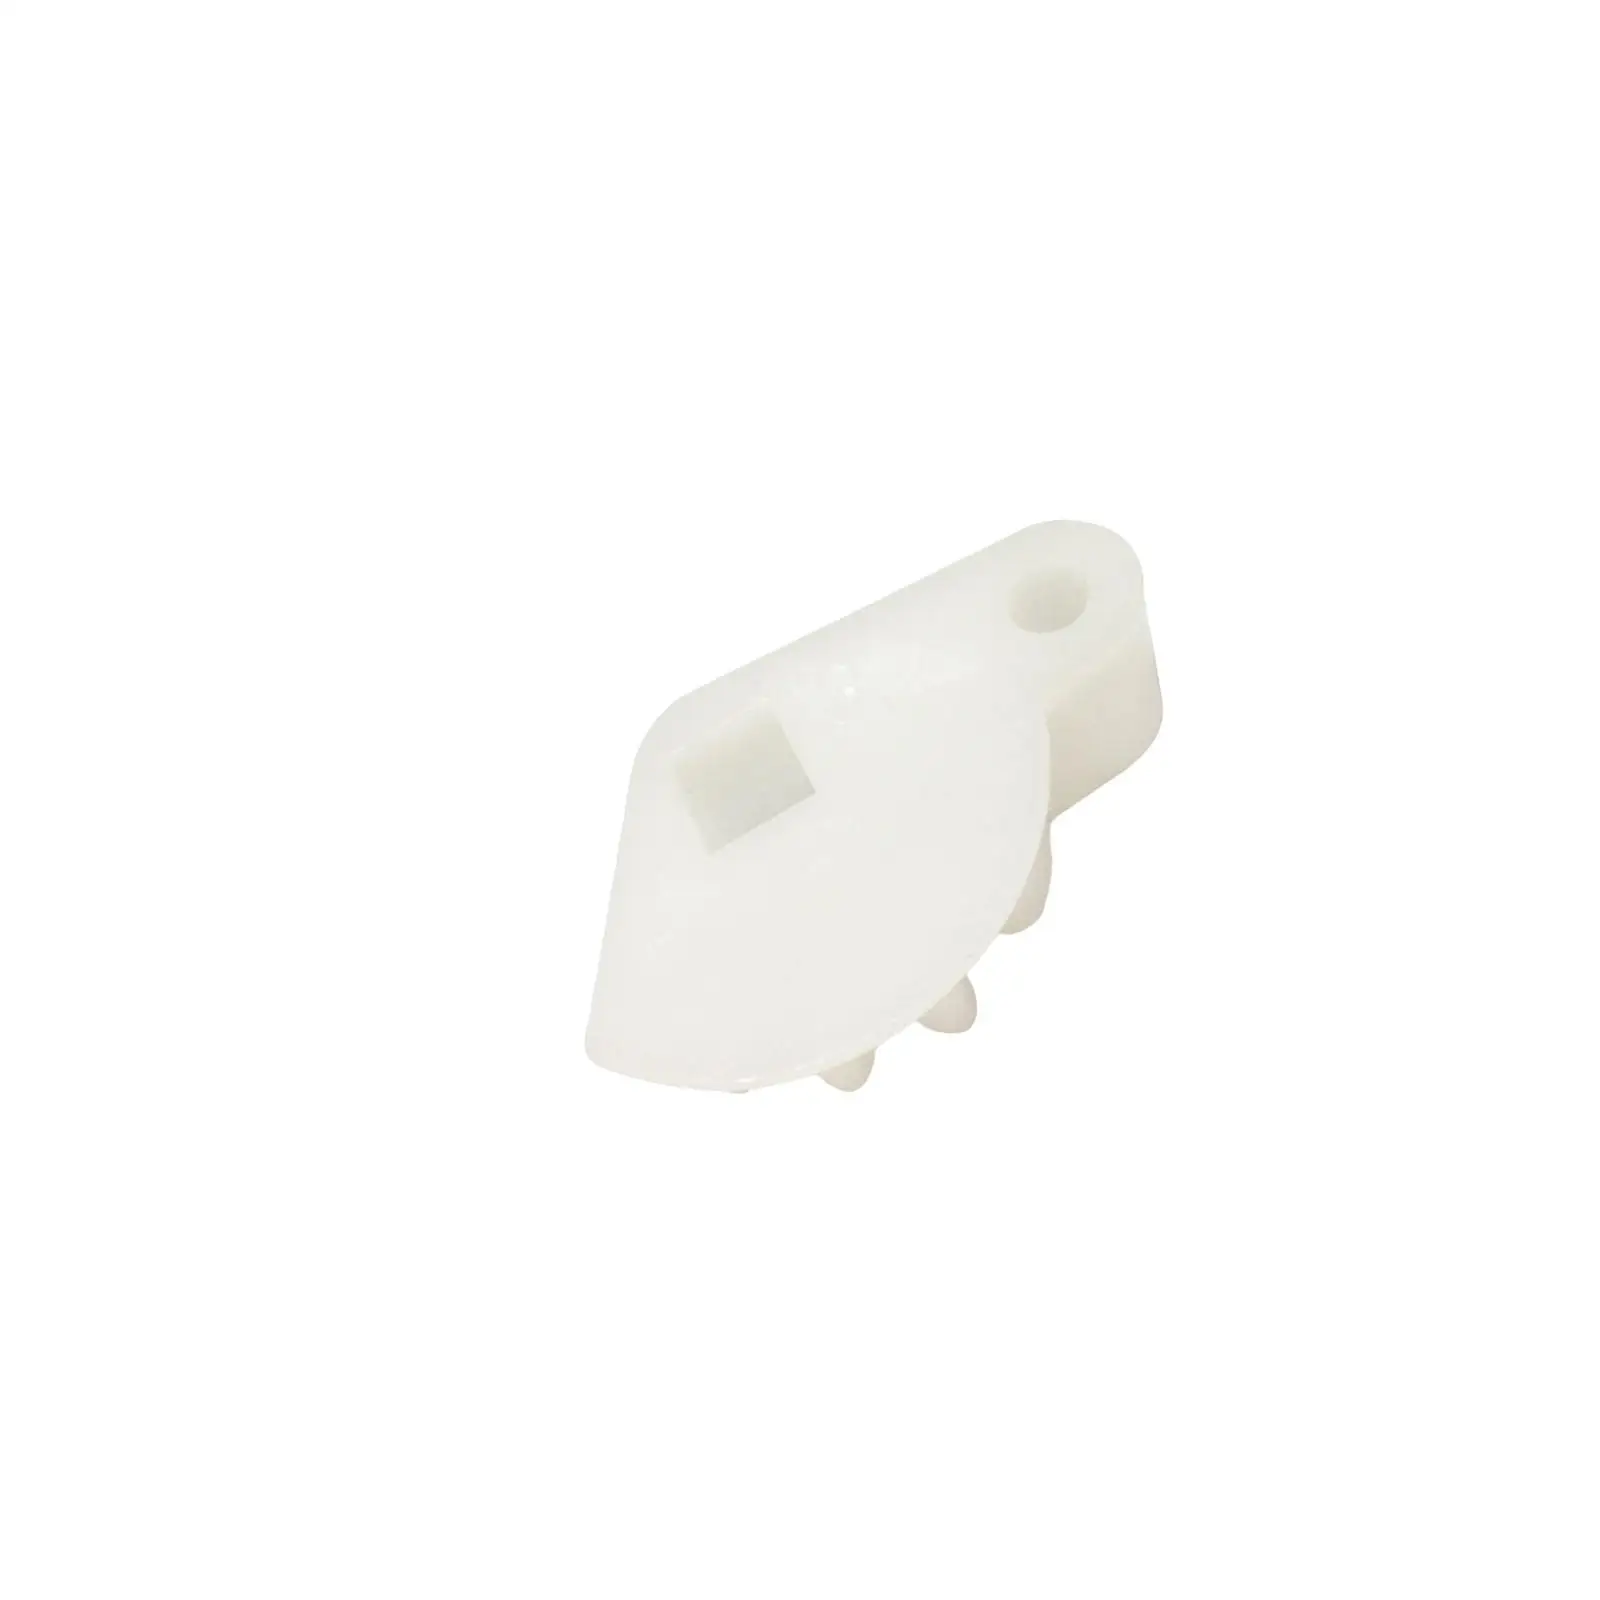 Shift Rod Lever 3B2-66225-0 for Tohatsu Outboard Motor White Direct Replacement Vehicle Repair Parts Easily Install